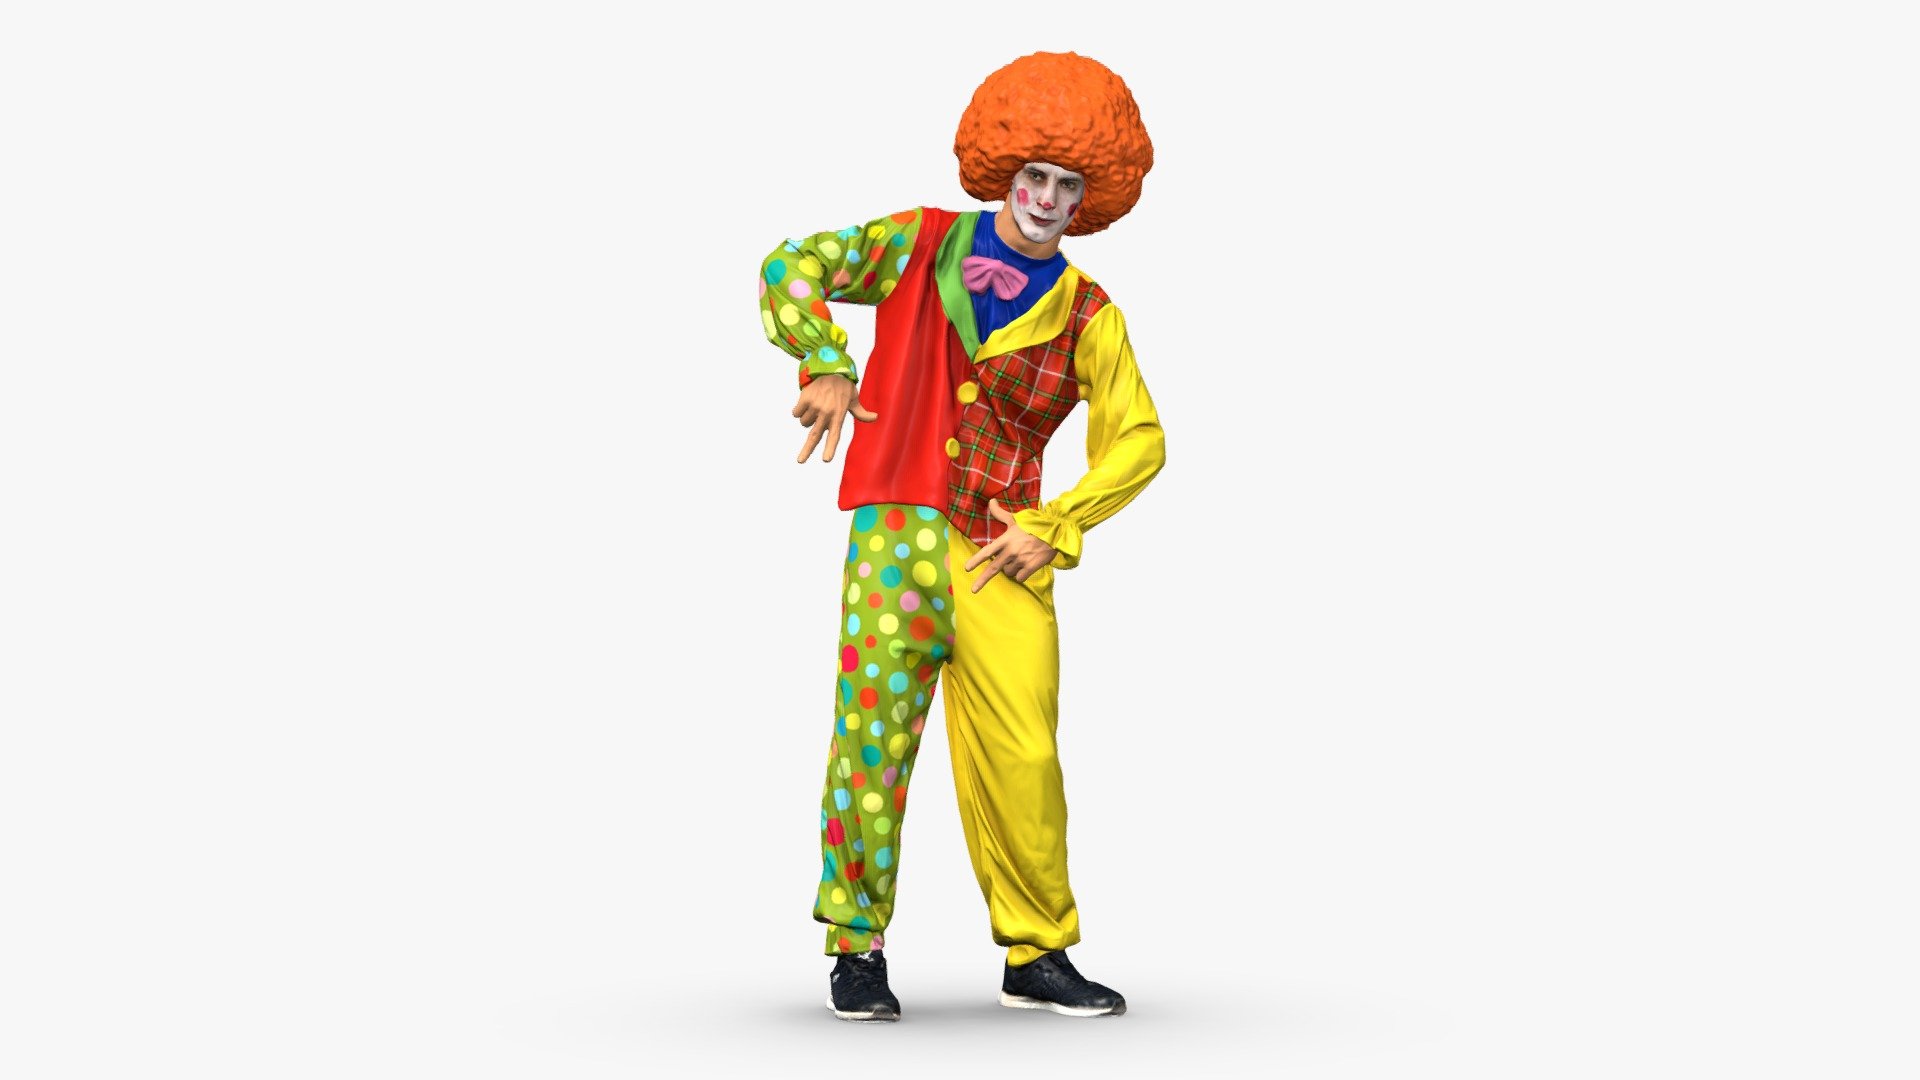 The 3D model depicts a clown in a brightly colored outfit with various patterns and textures. The clown has voluminous curly hair and is fully made up with traditional clown makeup, including a white base, a red nose, and colorful accents around the eyes and mouth. The clown strikes a playful and whimsical pose. The model was created through scanning 3d model